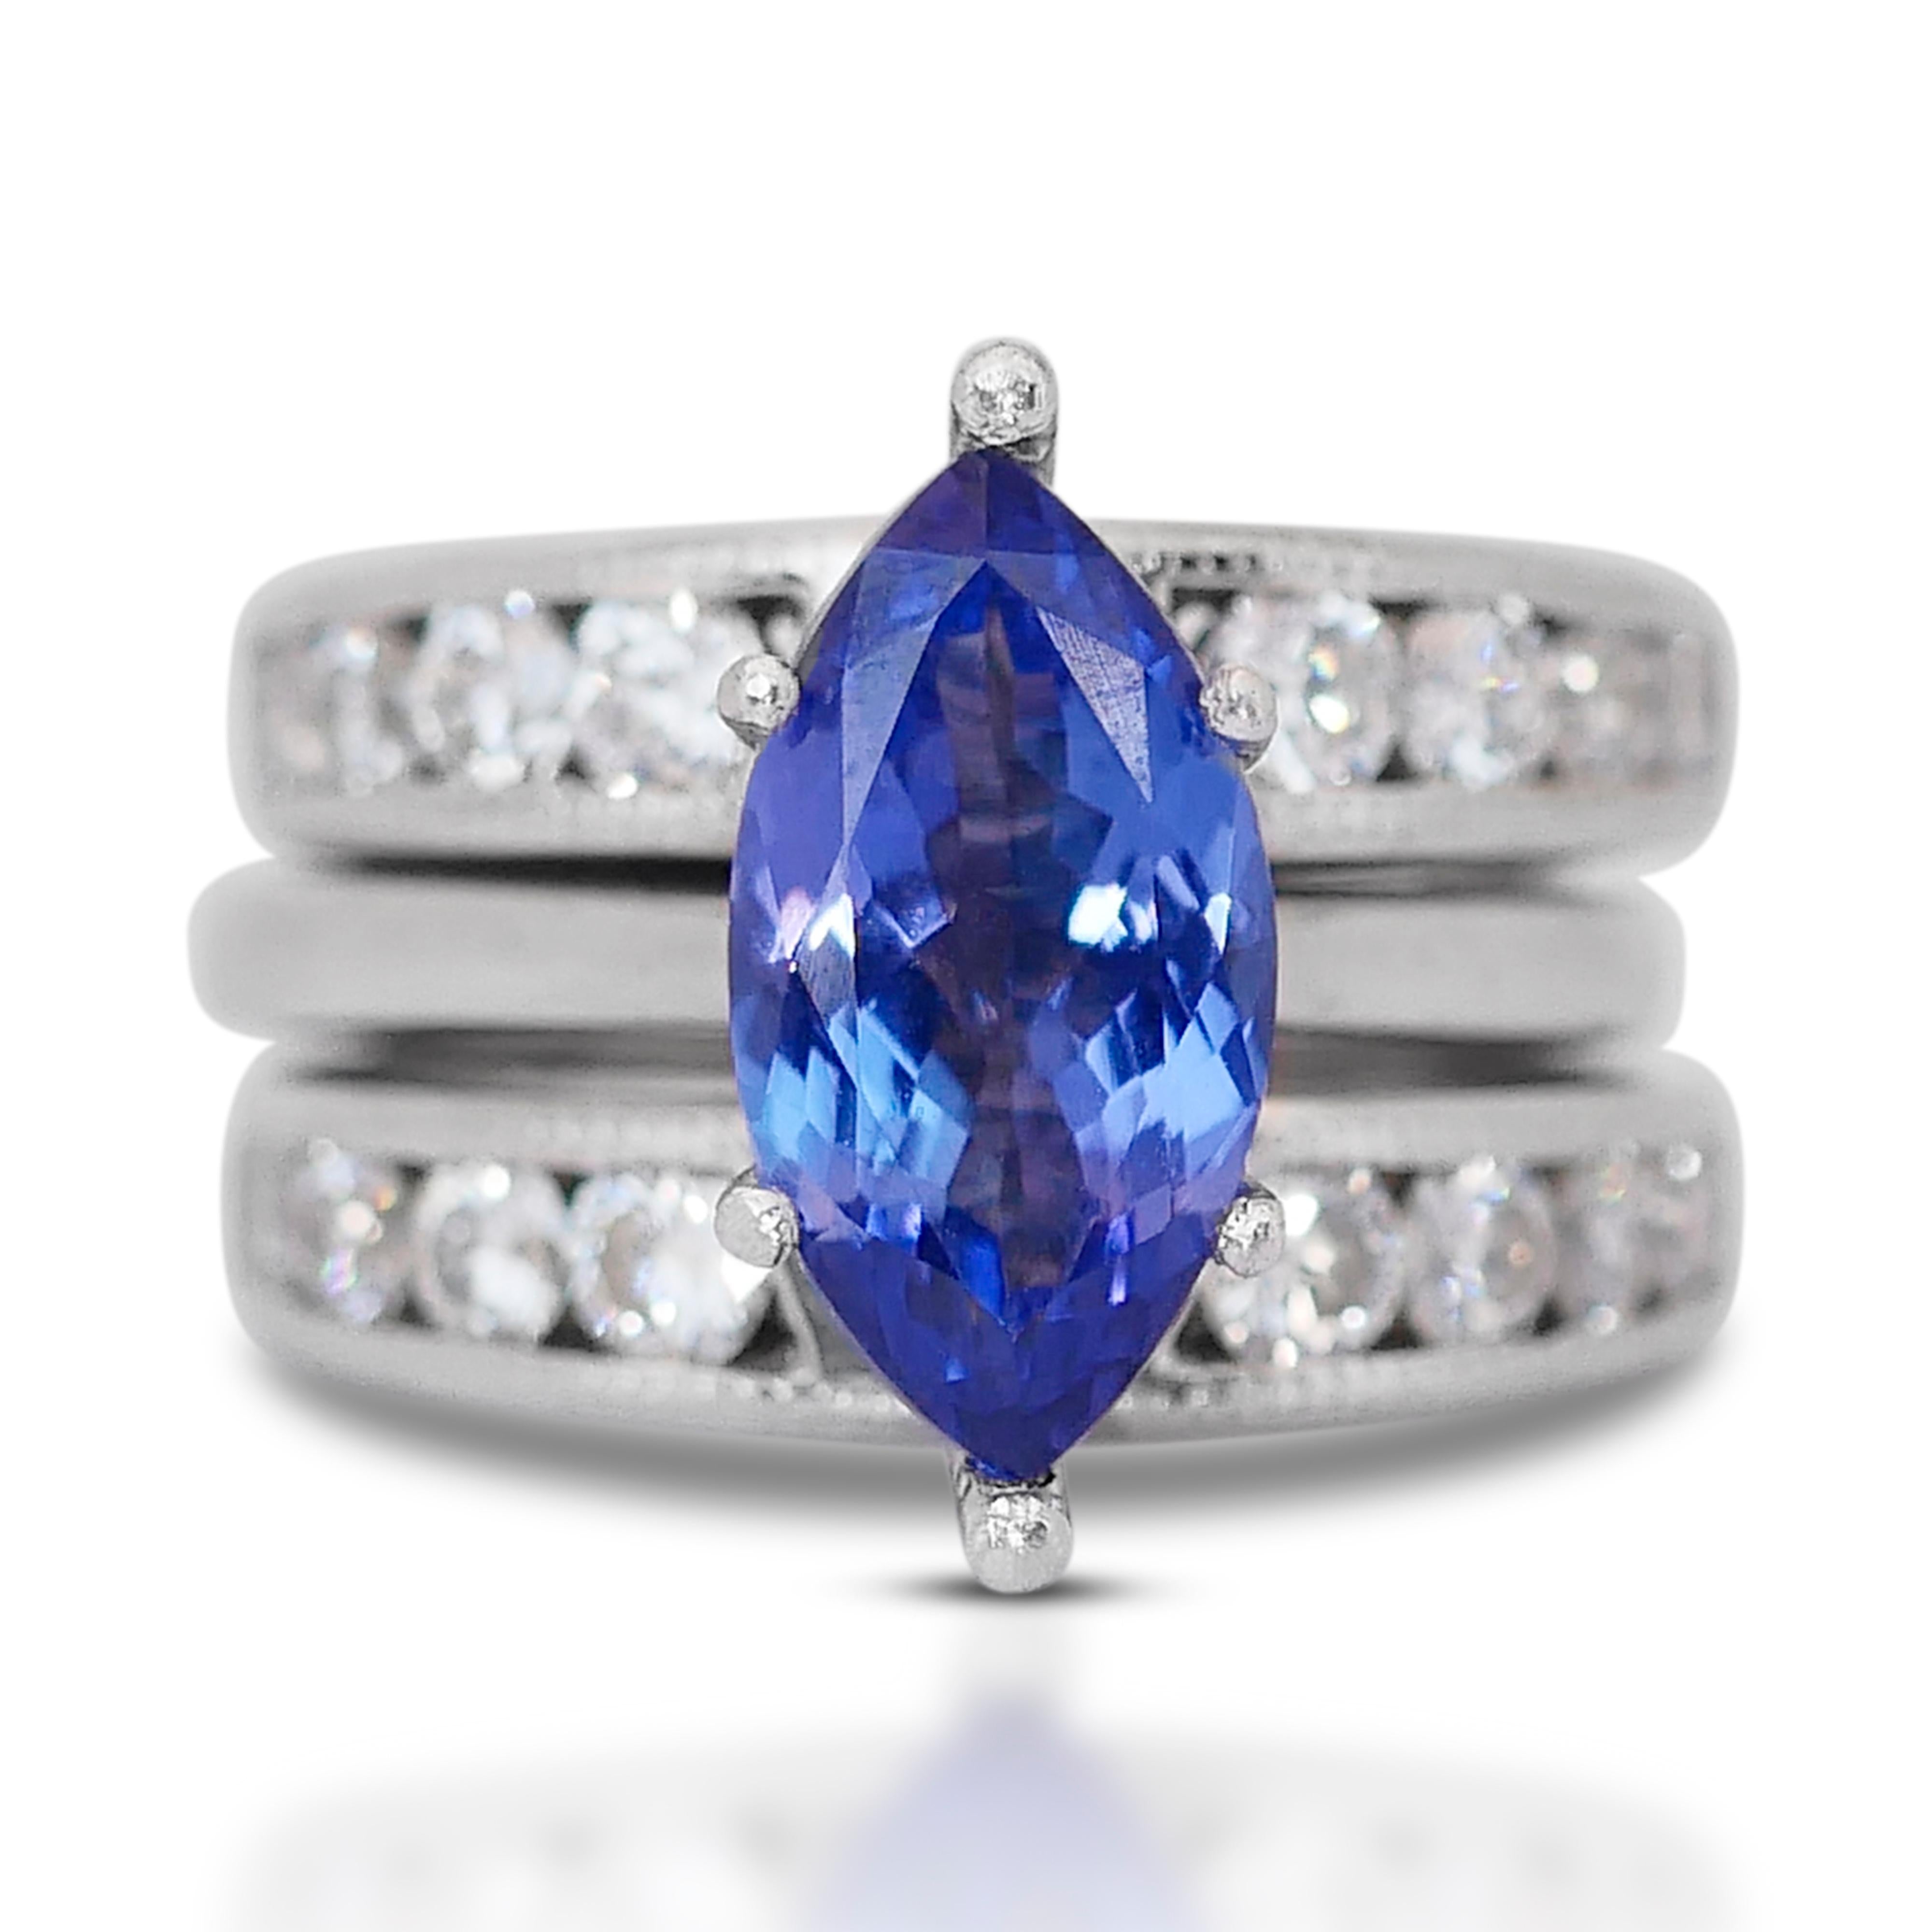 This exquisite ring exudes elegance and sophistication, featuring a captivating Tanzanite as its focal point and surrounded by a shimmering halo of diamonds.

At its center rests a magnificent Tanzanite, boasting a substantial 2.75 carat marquise